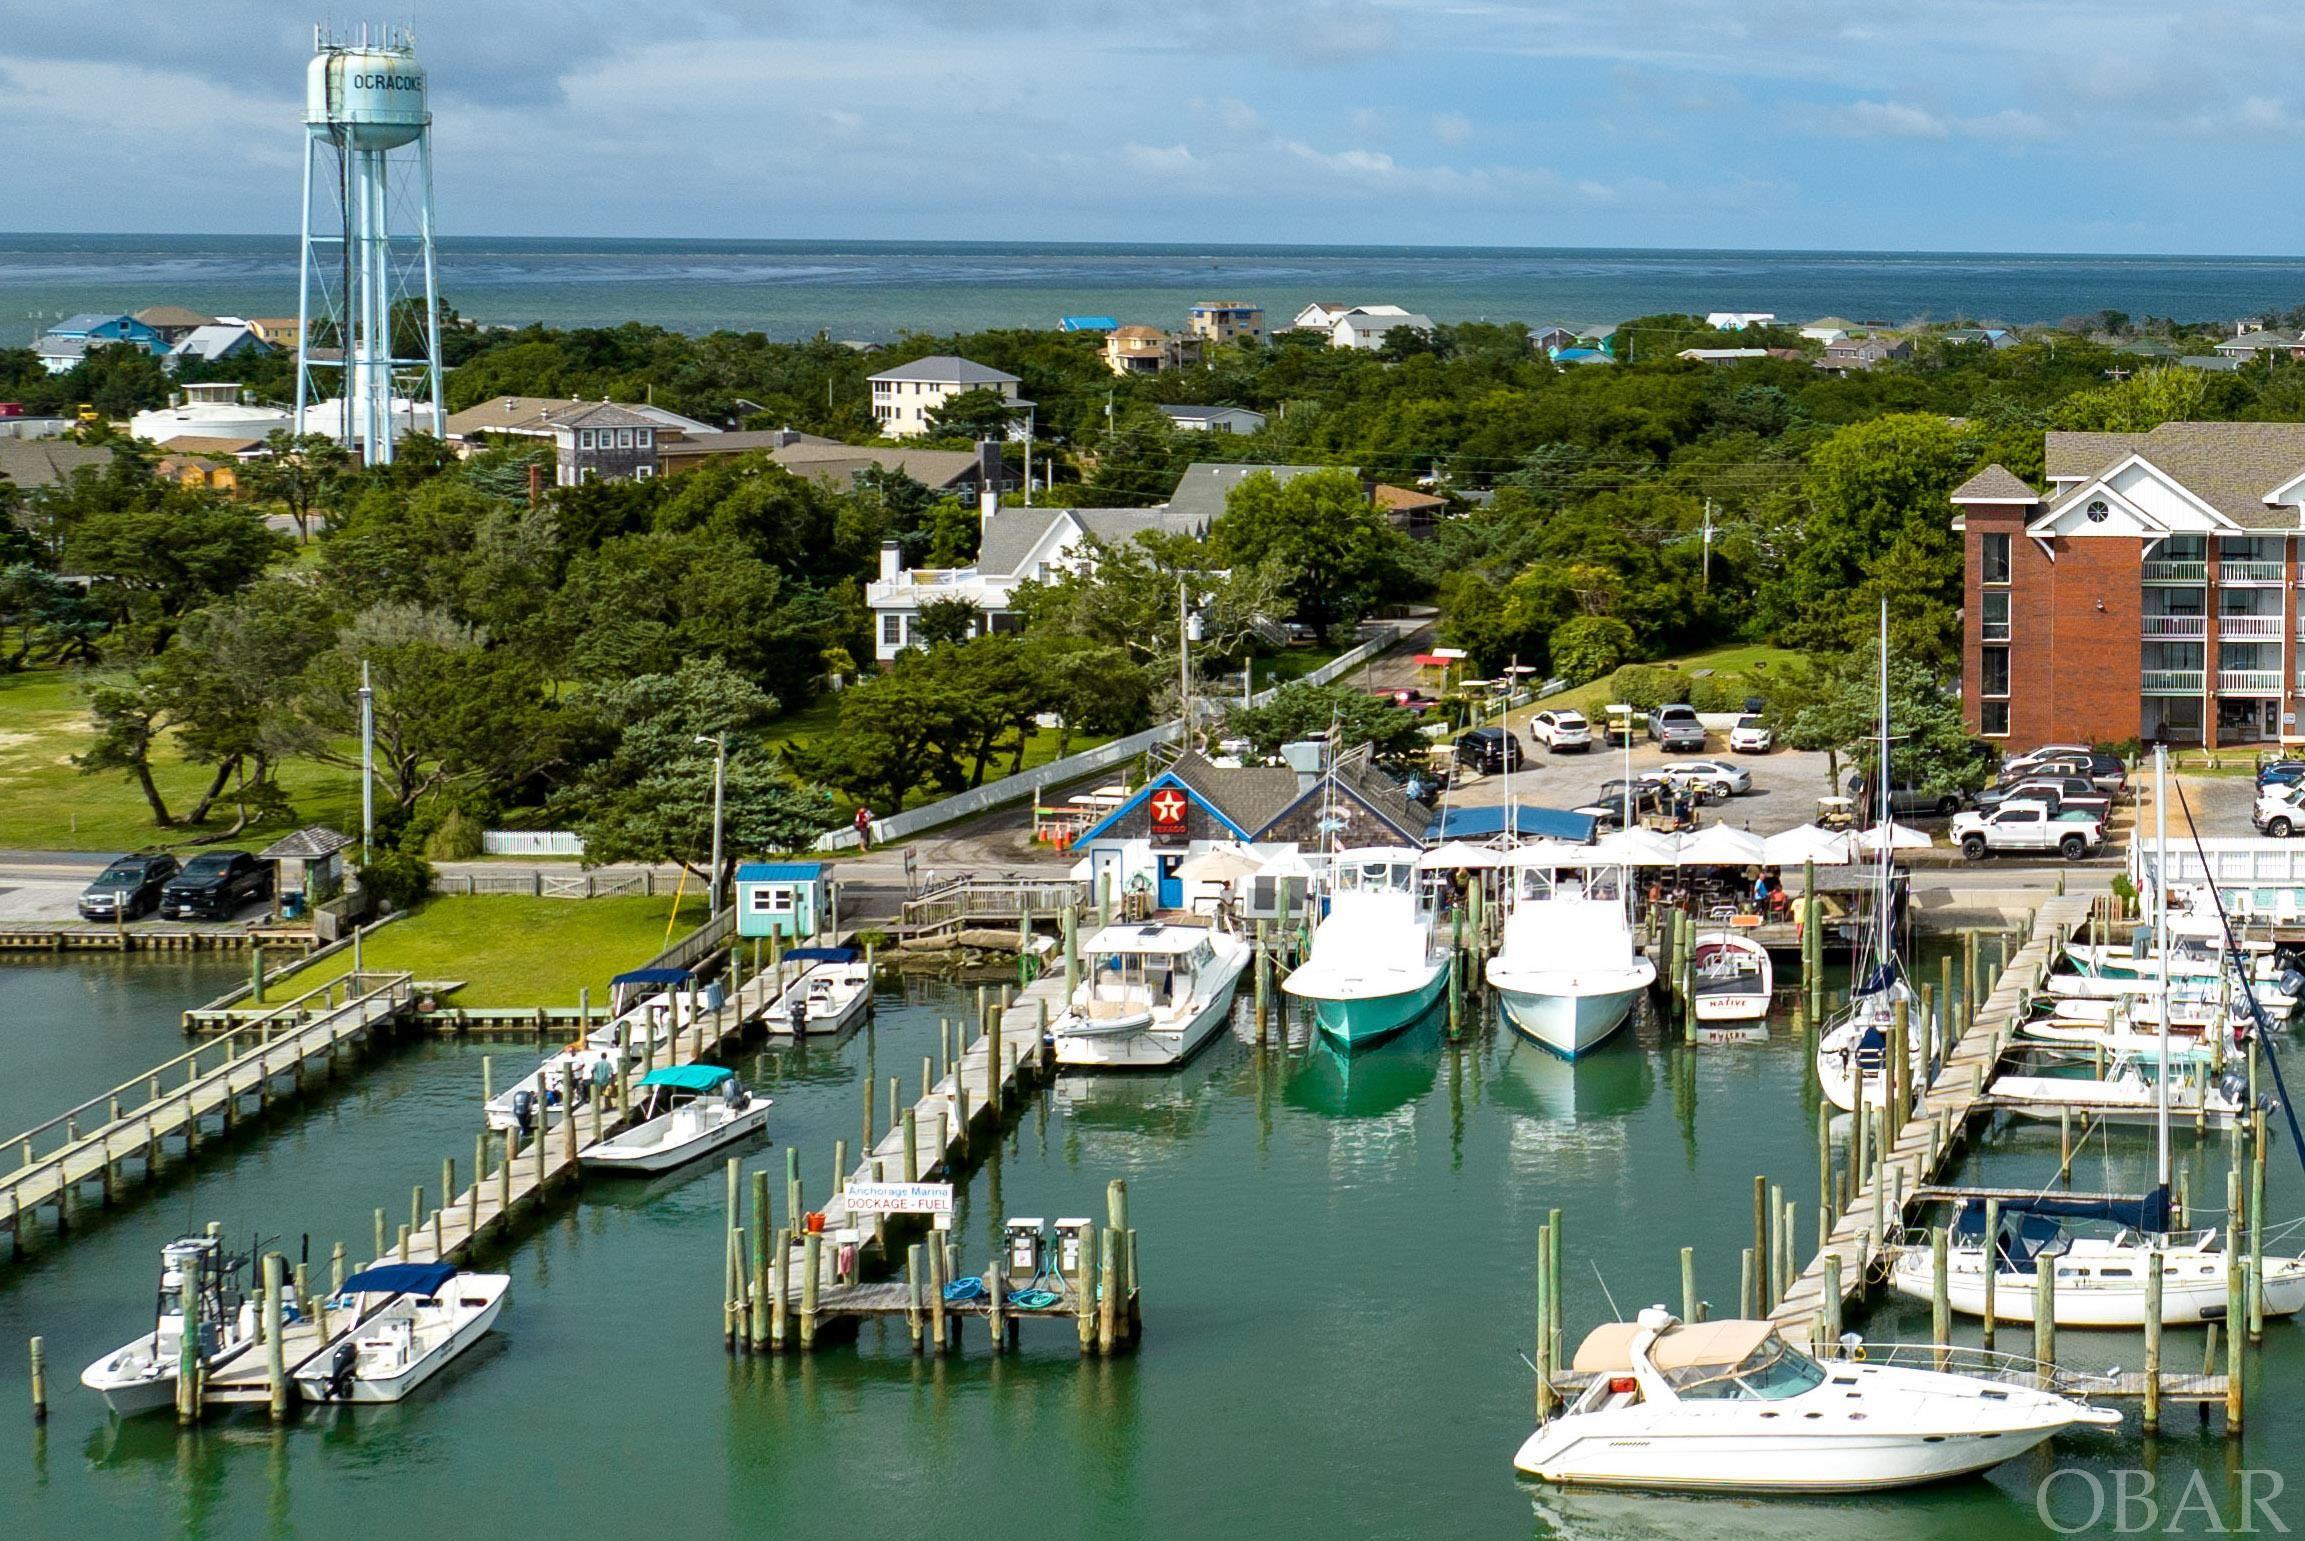 The only fuel service marina in Ocracoke is an international destination for transient vessels sailing the East Coast and ICW. 21 boat slips across 3 piers. Diesel and gasoline service center for dockside fueling. Power and water supply for overnight transient dockage. Marina is regularly fully booked throughout the season and there is a lengthy waiting list for long term slip leases. 150'+/- of prime harbor frontage right on Hwy 12. The Anchorage Marina and SmacNally's dockside bar and grill are the first commercial sitings off of the southern vehicle and passenger ferry. SmacNally's bar and grill, current restaurant lessee at the marina, is the only waterside dining on the island. Multiple slips occupied by local charter fishing boats, a large afternoon attraction. Turnkey opportunity for an owner/operator or investor wishing to own a long standing and successful island business. Package deal available for combined purchase of Ocracoke Marina and Anchorage Inn. Contact your agent today for more details.